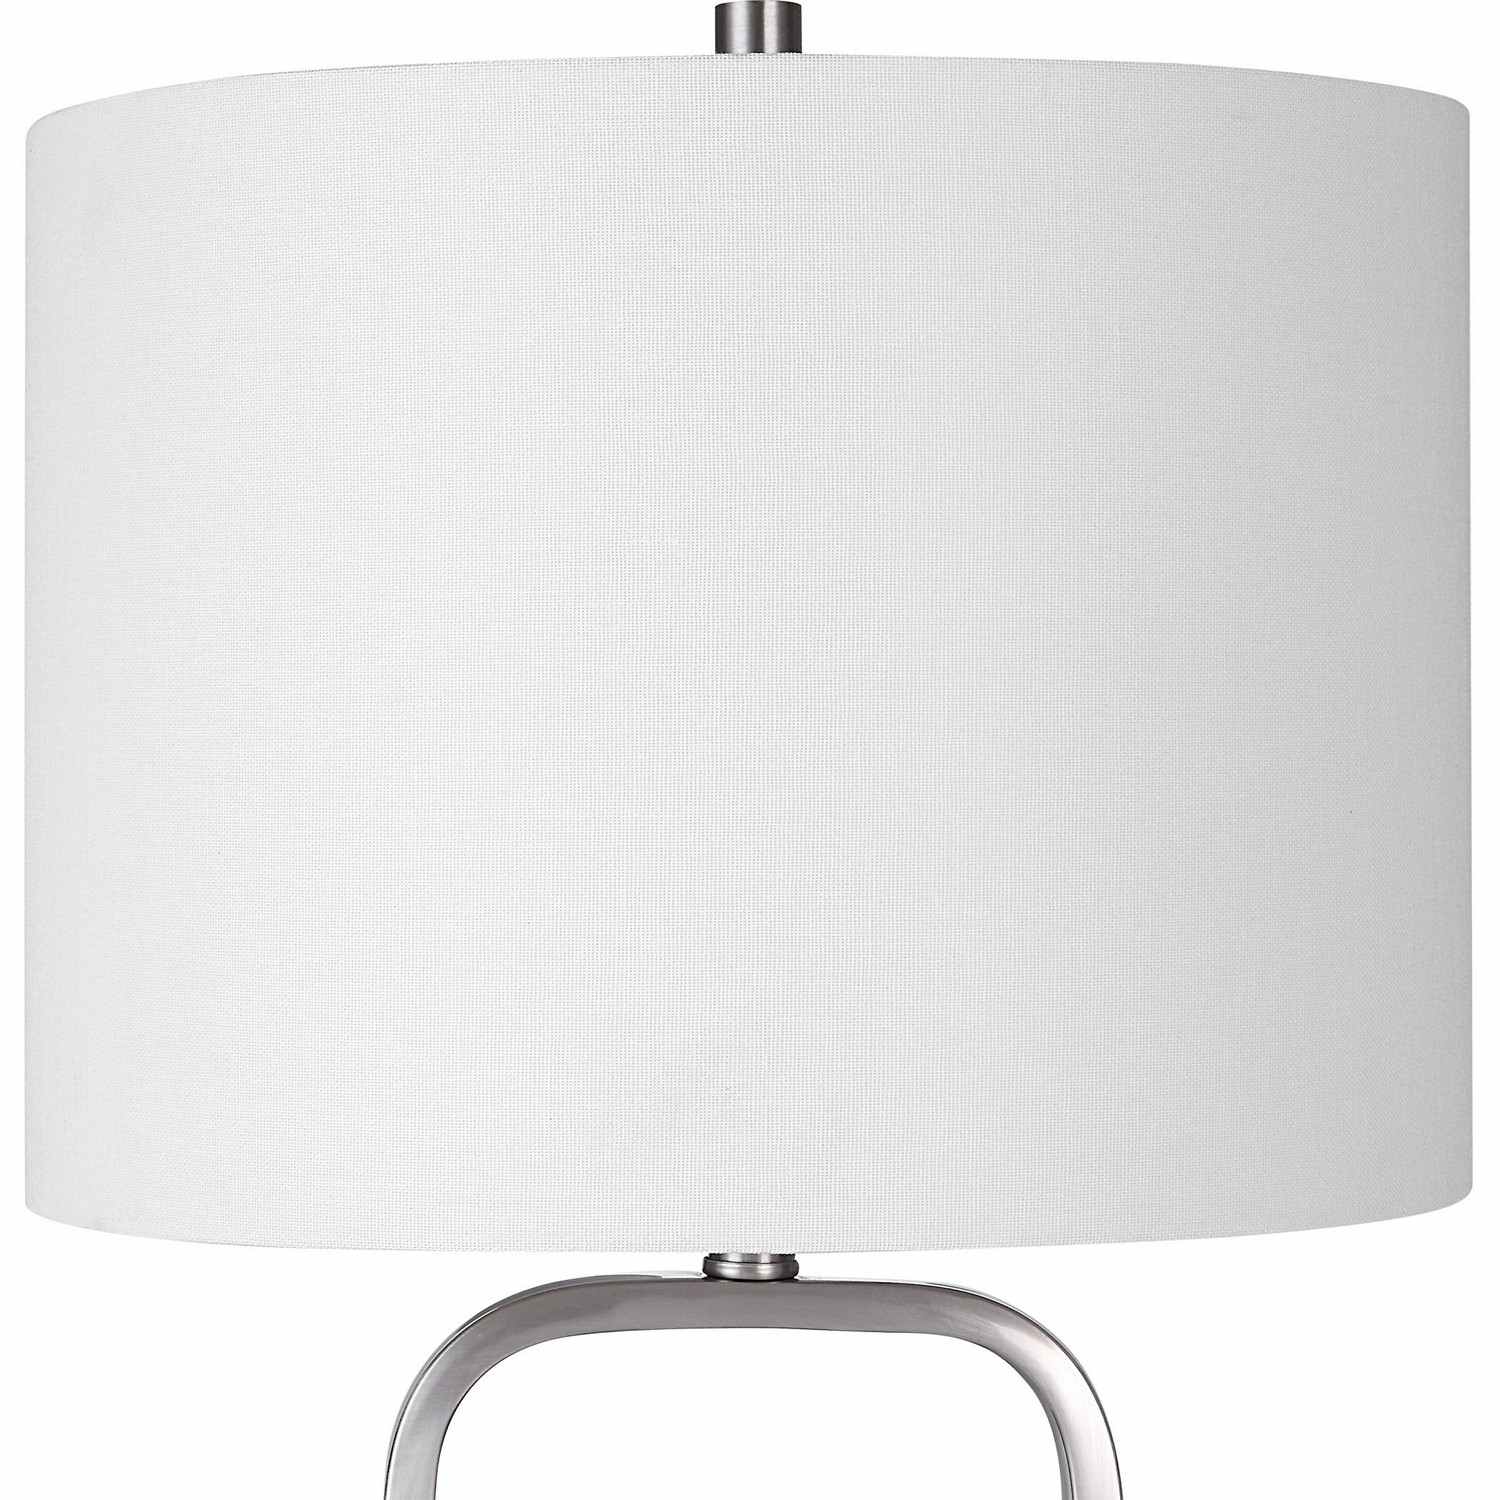 Uttermost W26084-1 Table Lamp - Brushed Nickel